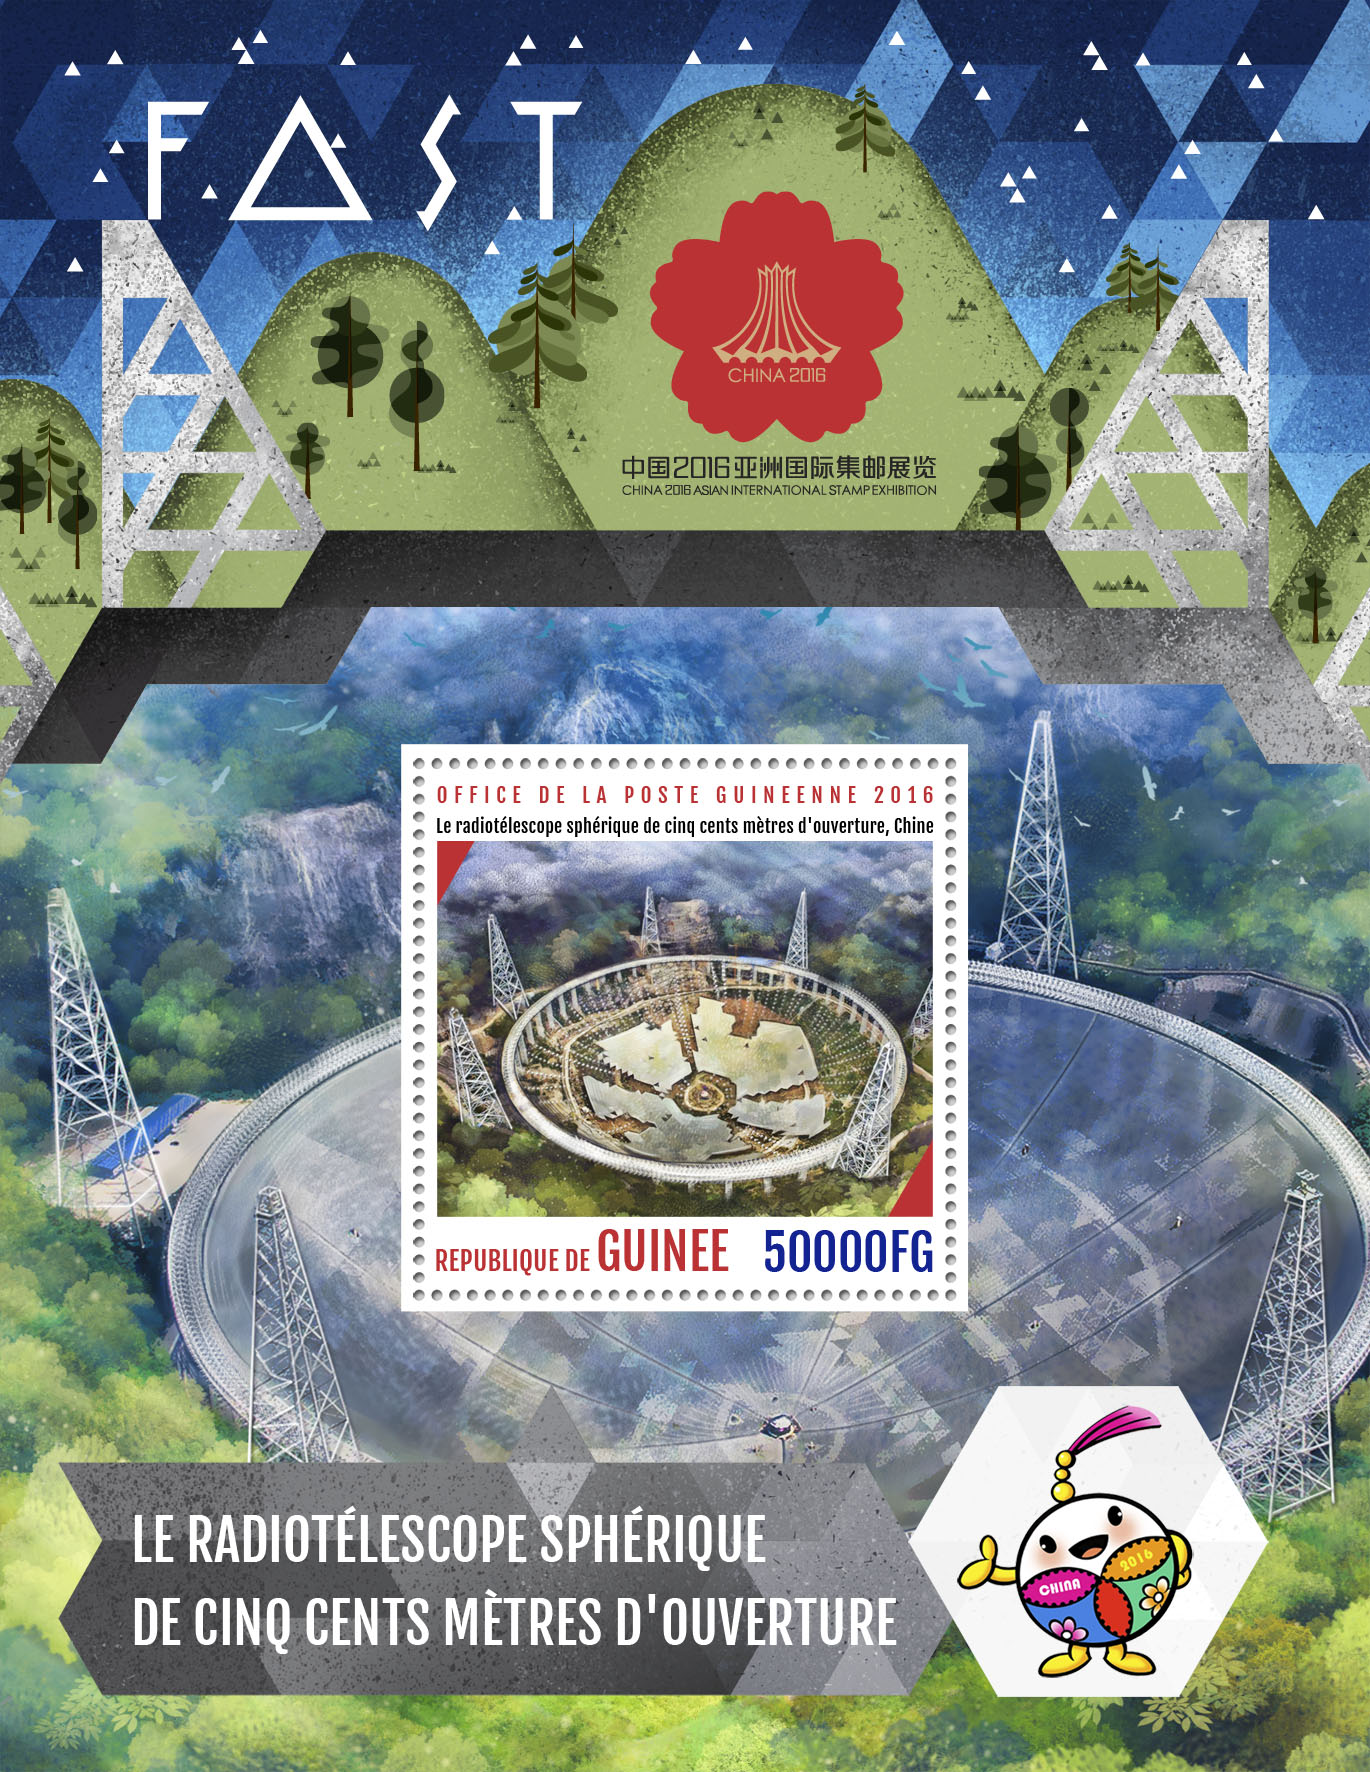 Radio Telescope  - Issue of Guinée postage stamps